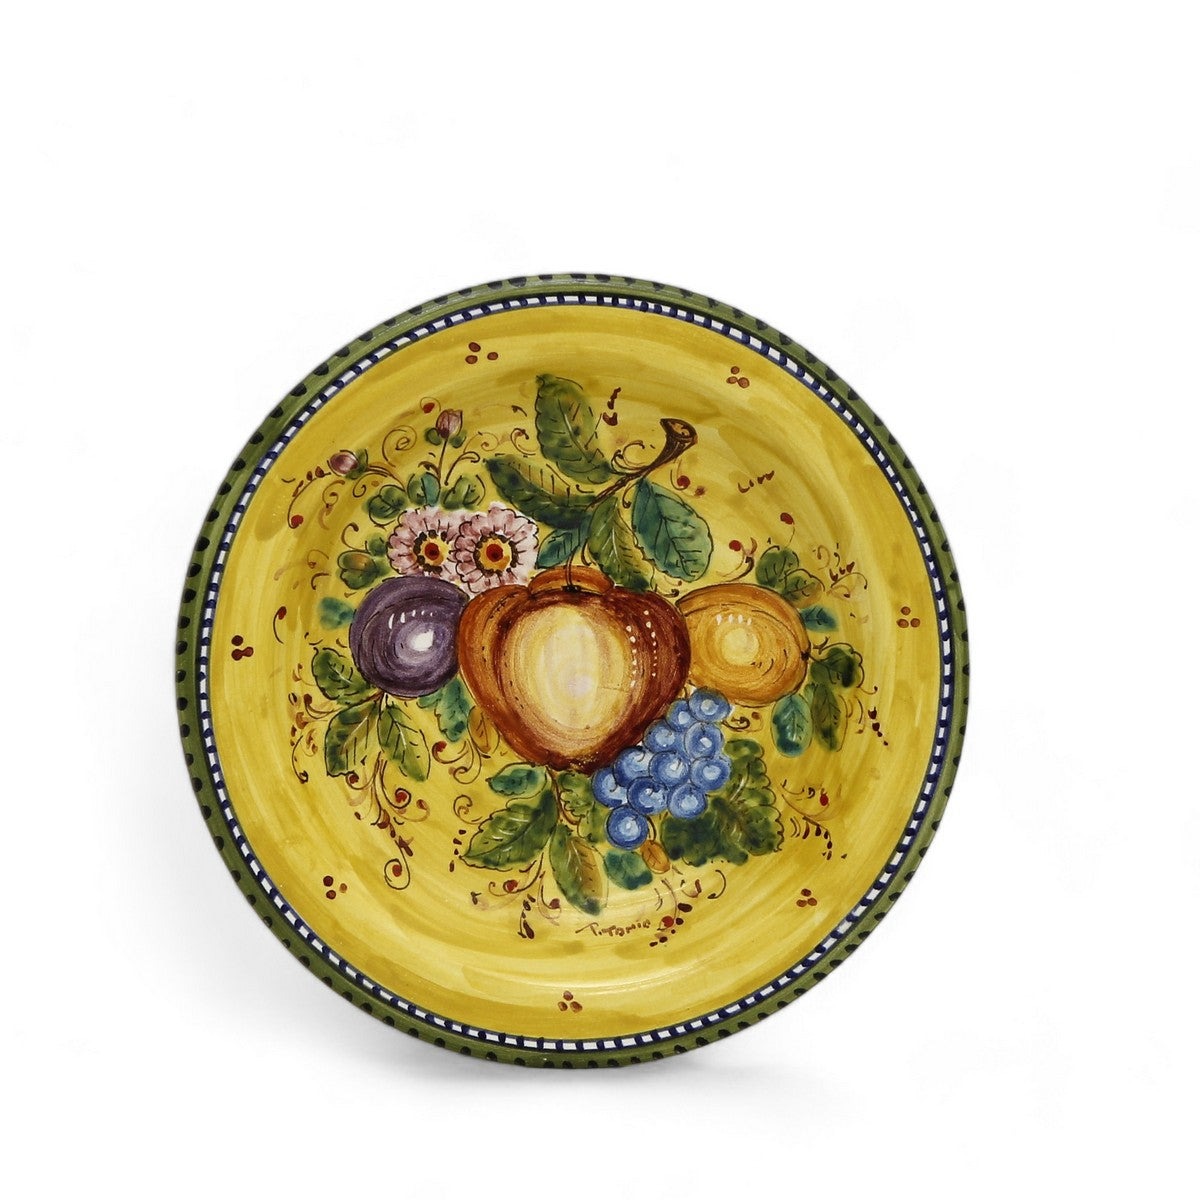 TUSCAN MAJOLICA: Plates featuring a traditional Tuscan design with a Yellow background - SET OF 3 PCS on a three-tier plate rack stand.